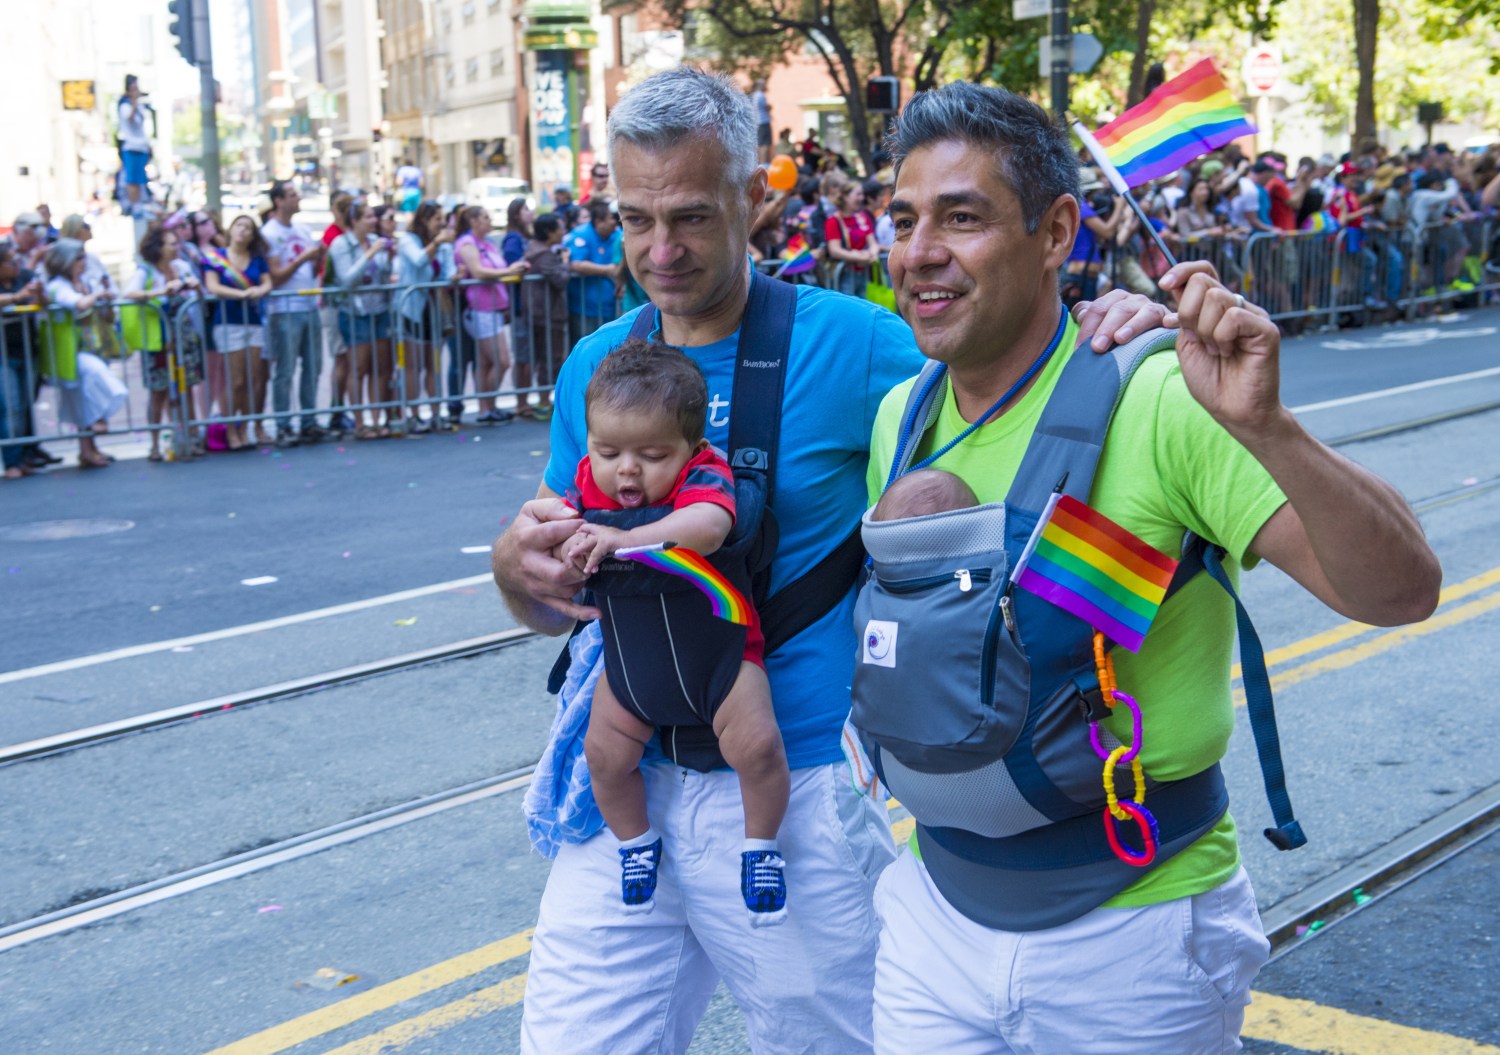 A gay couple and their two children participates at the annual San Francisco Gay pride parade in San Francisco in June 2019.